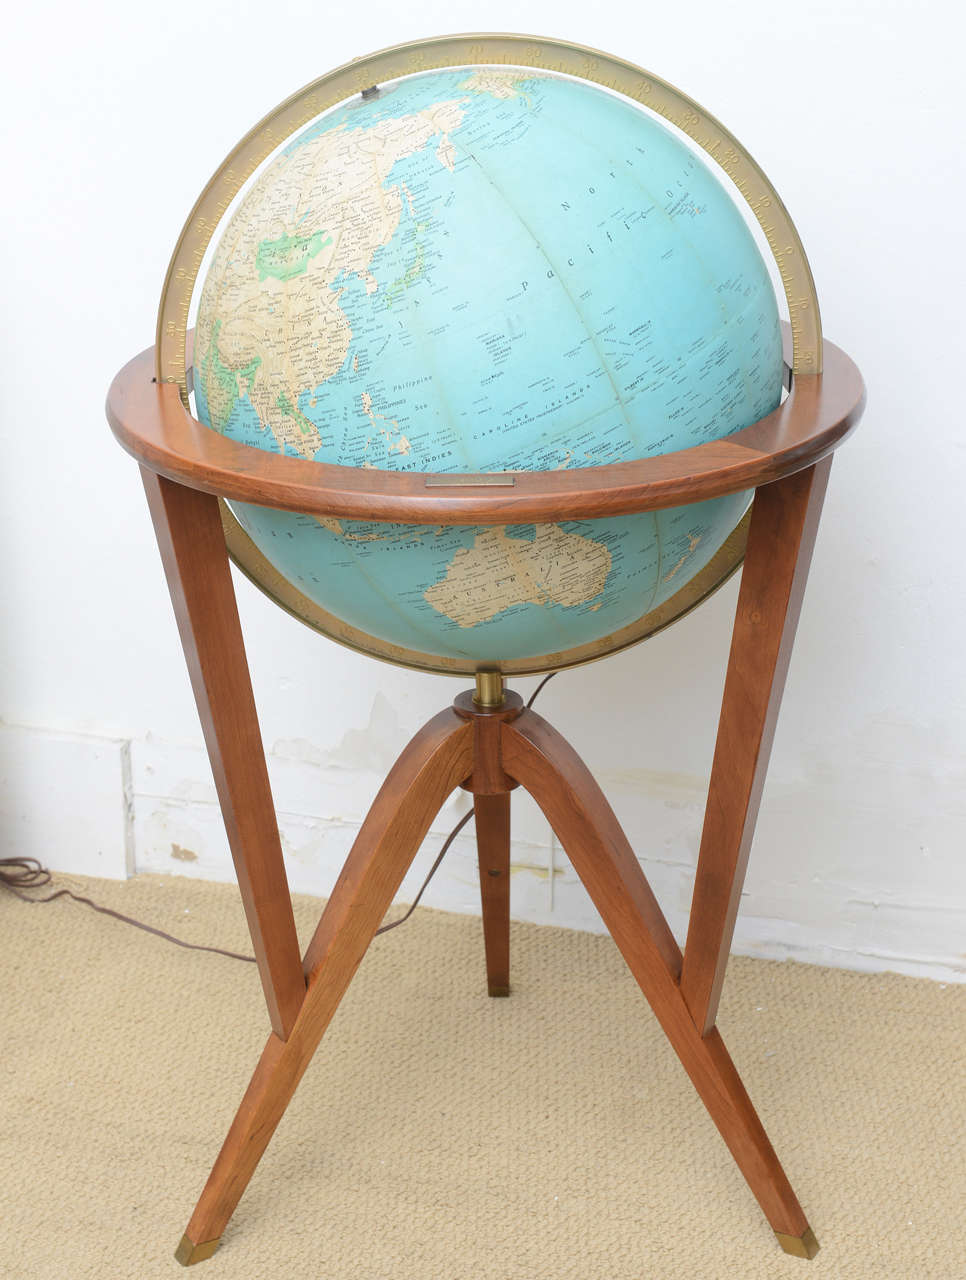 All original excellent condition stand and globe designed by Edward Wormley for Dunbar. This piece was a gift to Mr. Charles T. Samek for 30 years of work for the Bell Laboratories.